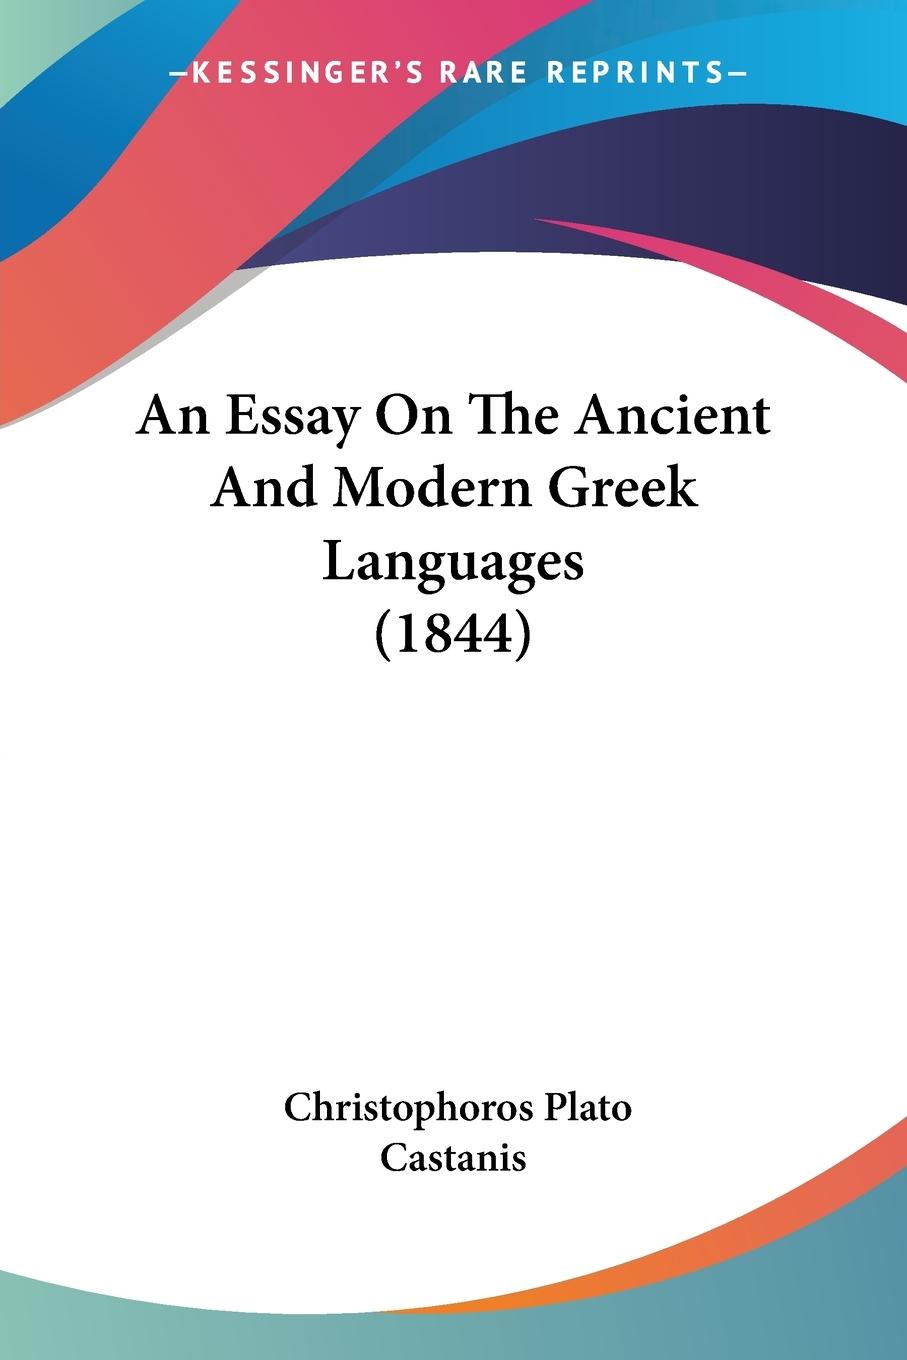 An Essay On The Ancient And Modern Greek Languages (1844) - Castanis, Christophoros Plato